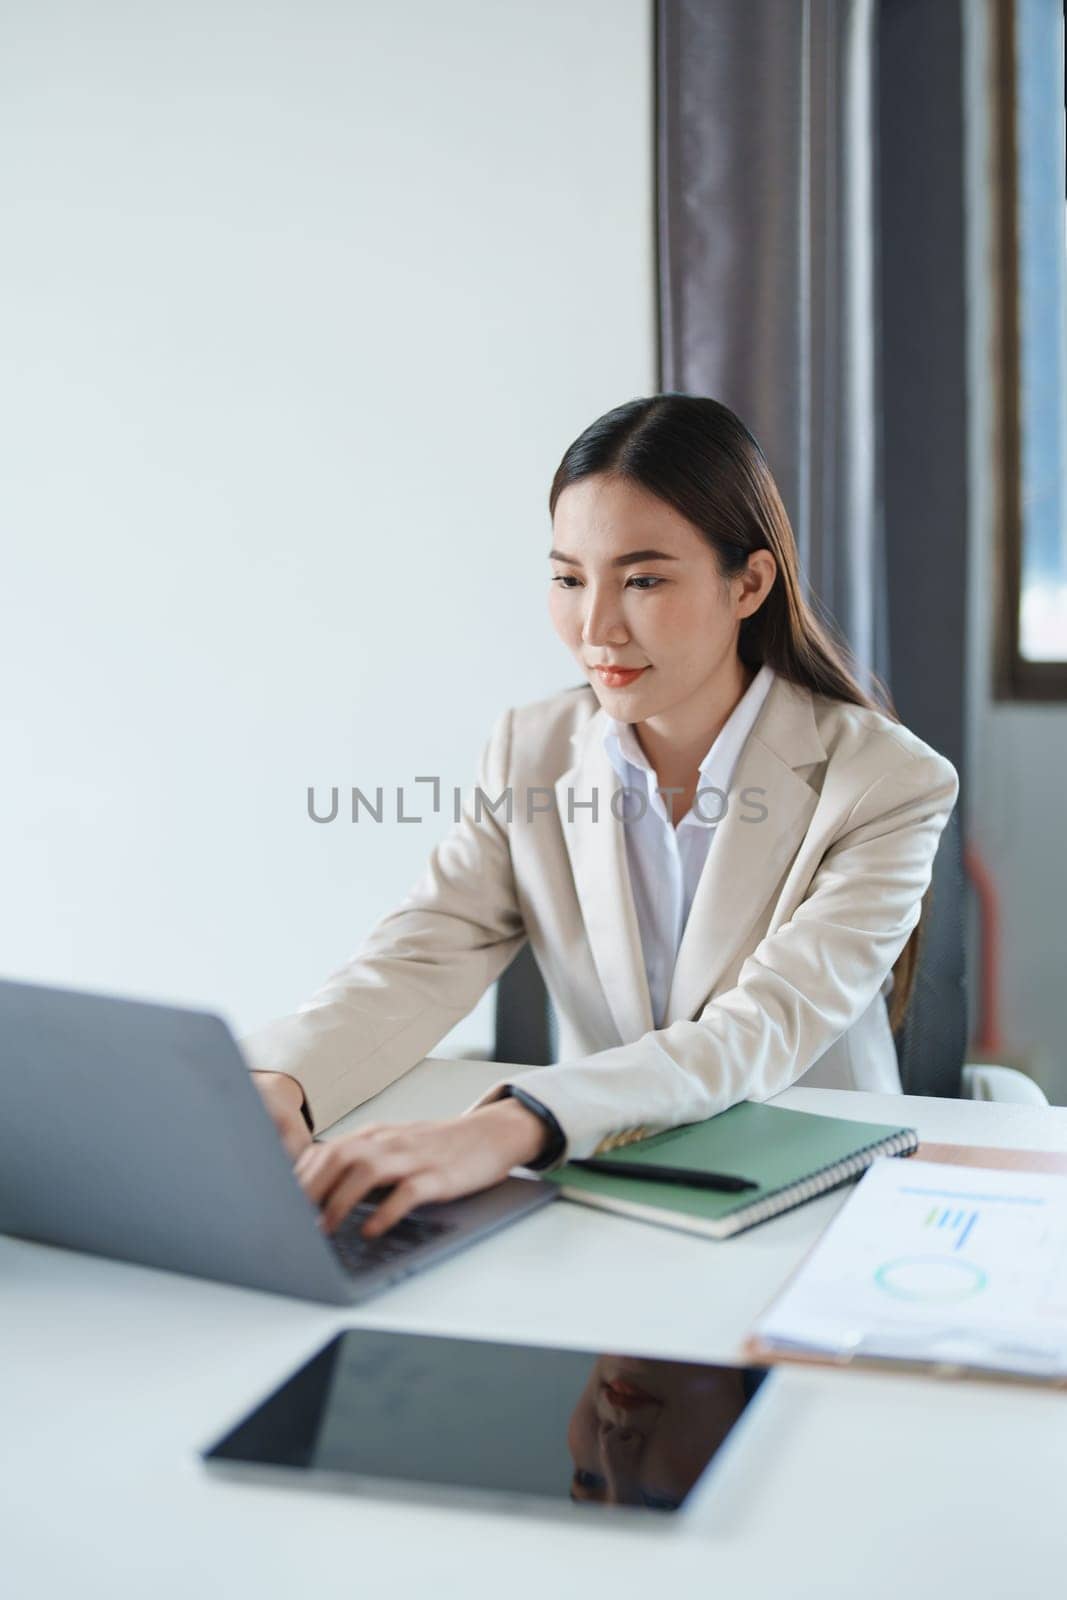 Portrait of a young Asian woman showing a smiling face as she using computer and financial documents on her desk in the early morning hours. by Manastrong